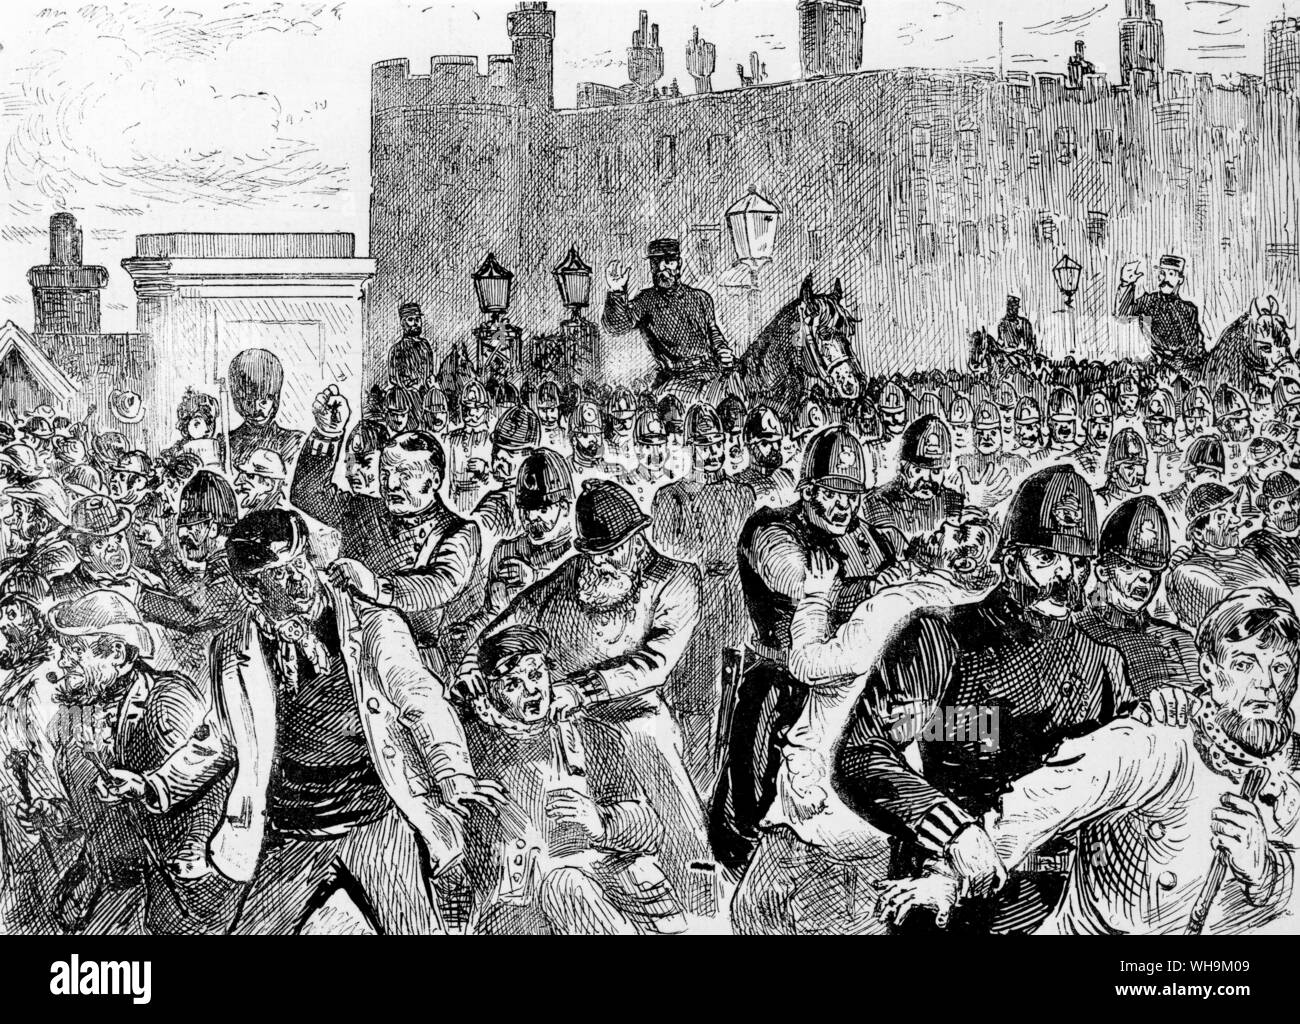 Feb 20th 1886: Pictorial News Illustration of the Great Riots in London. Attack on St. James's Palace. Stock Photo